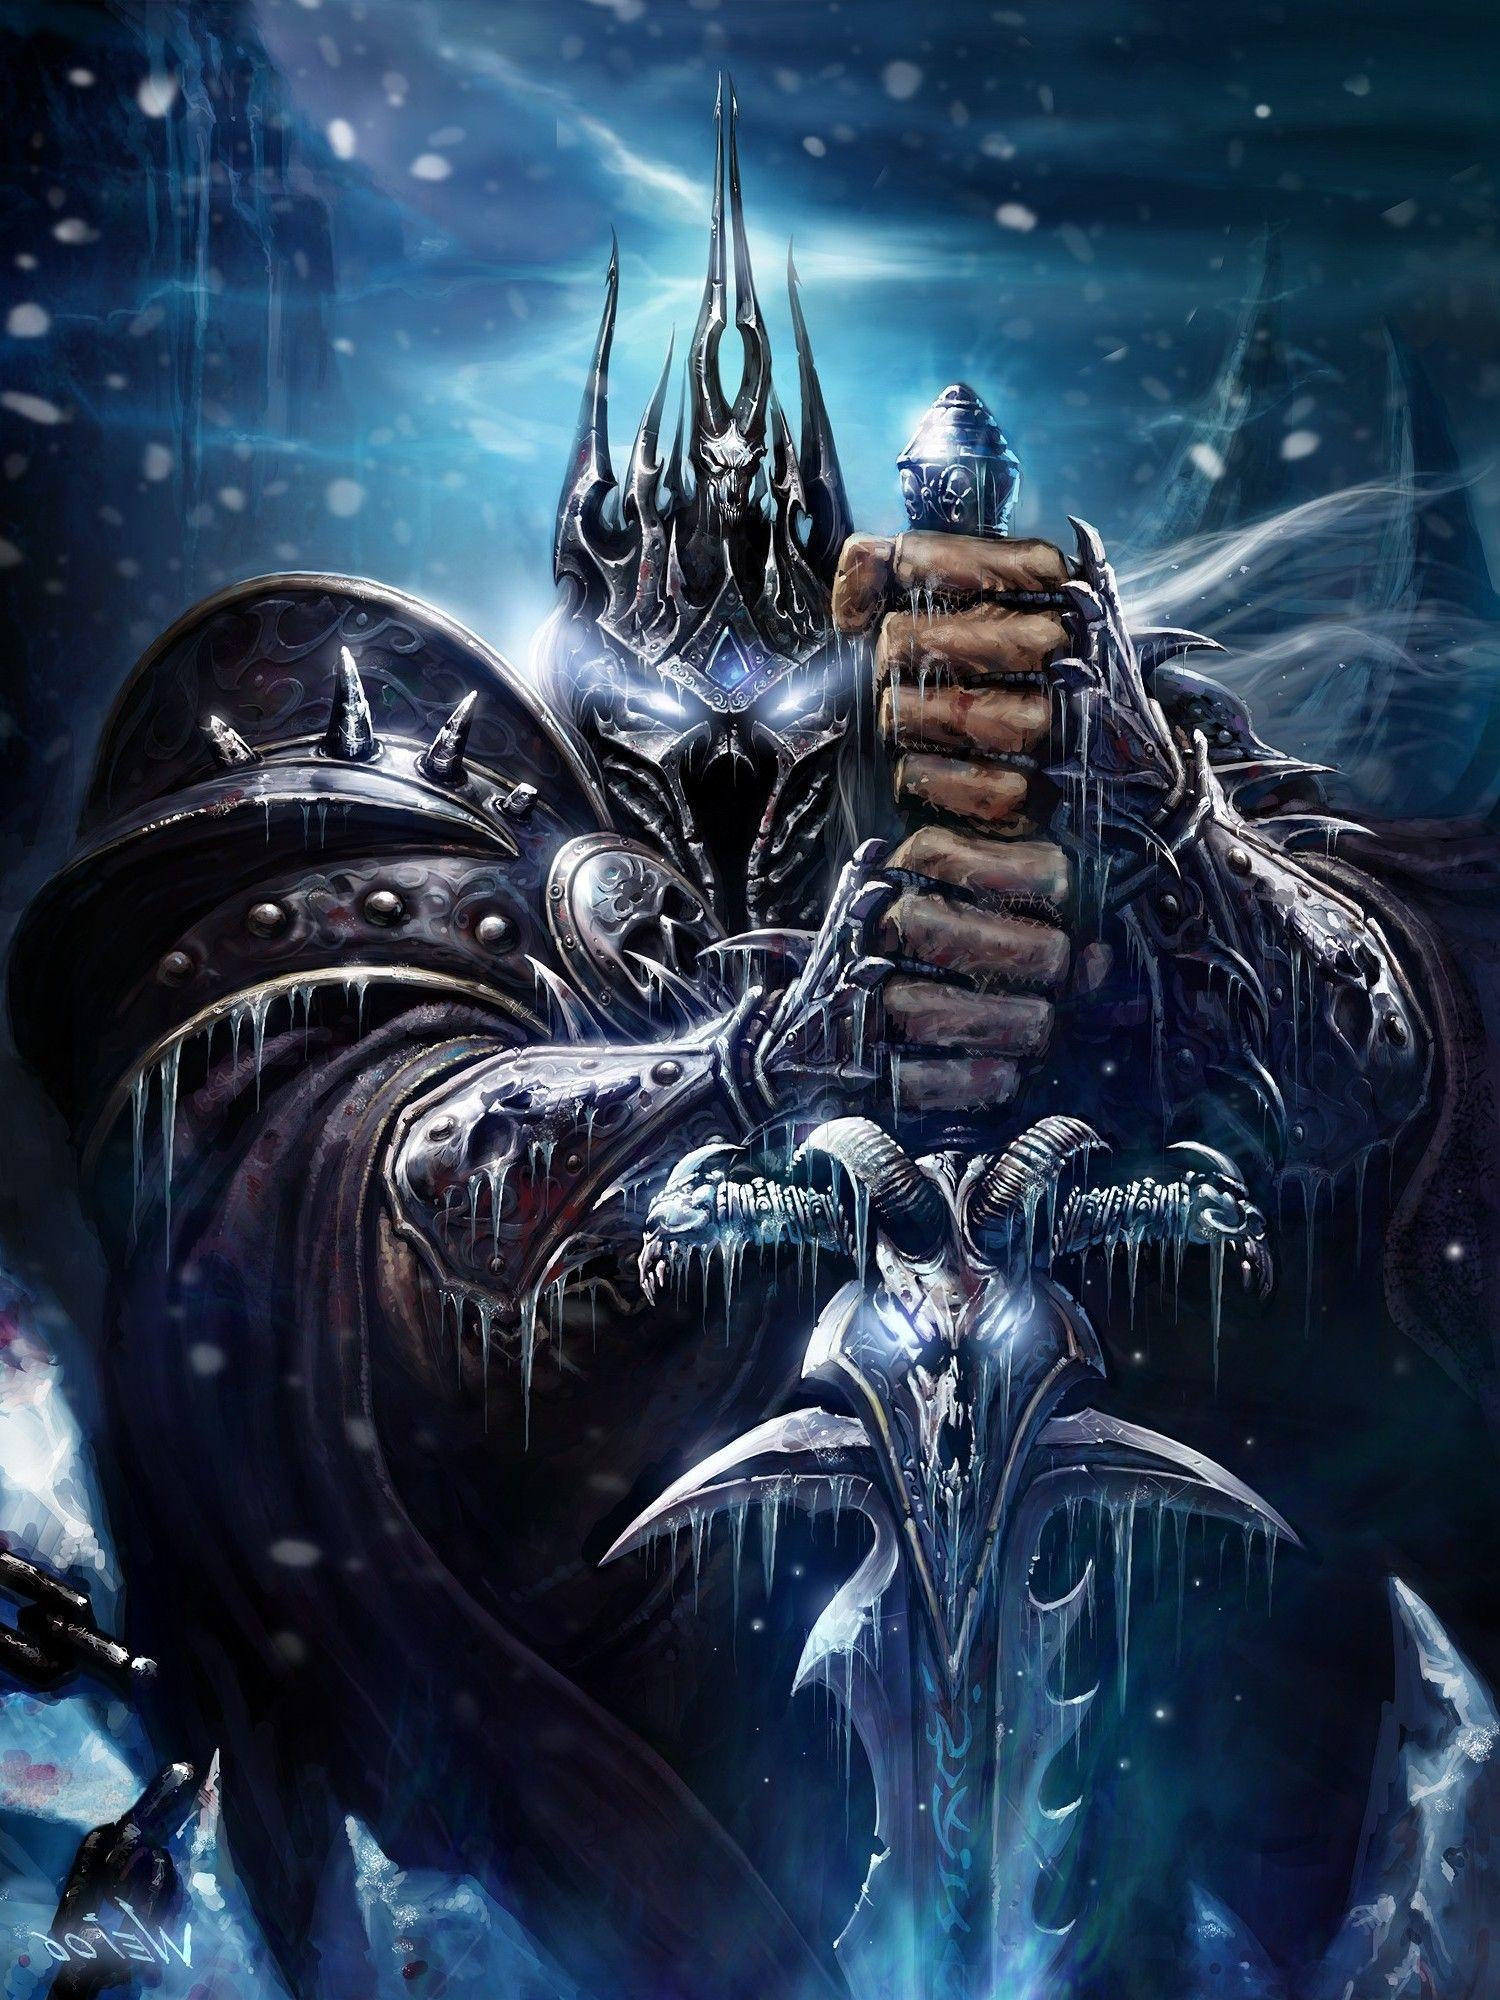 World Of Warcraft: Wrath Of The Lich King Wallpapers - Wallpaper Cave